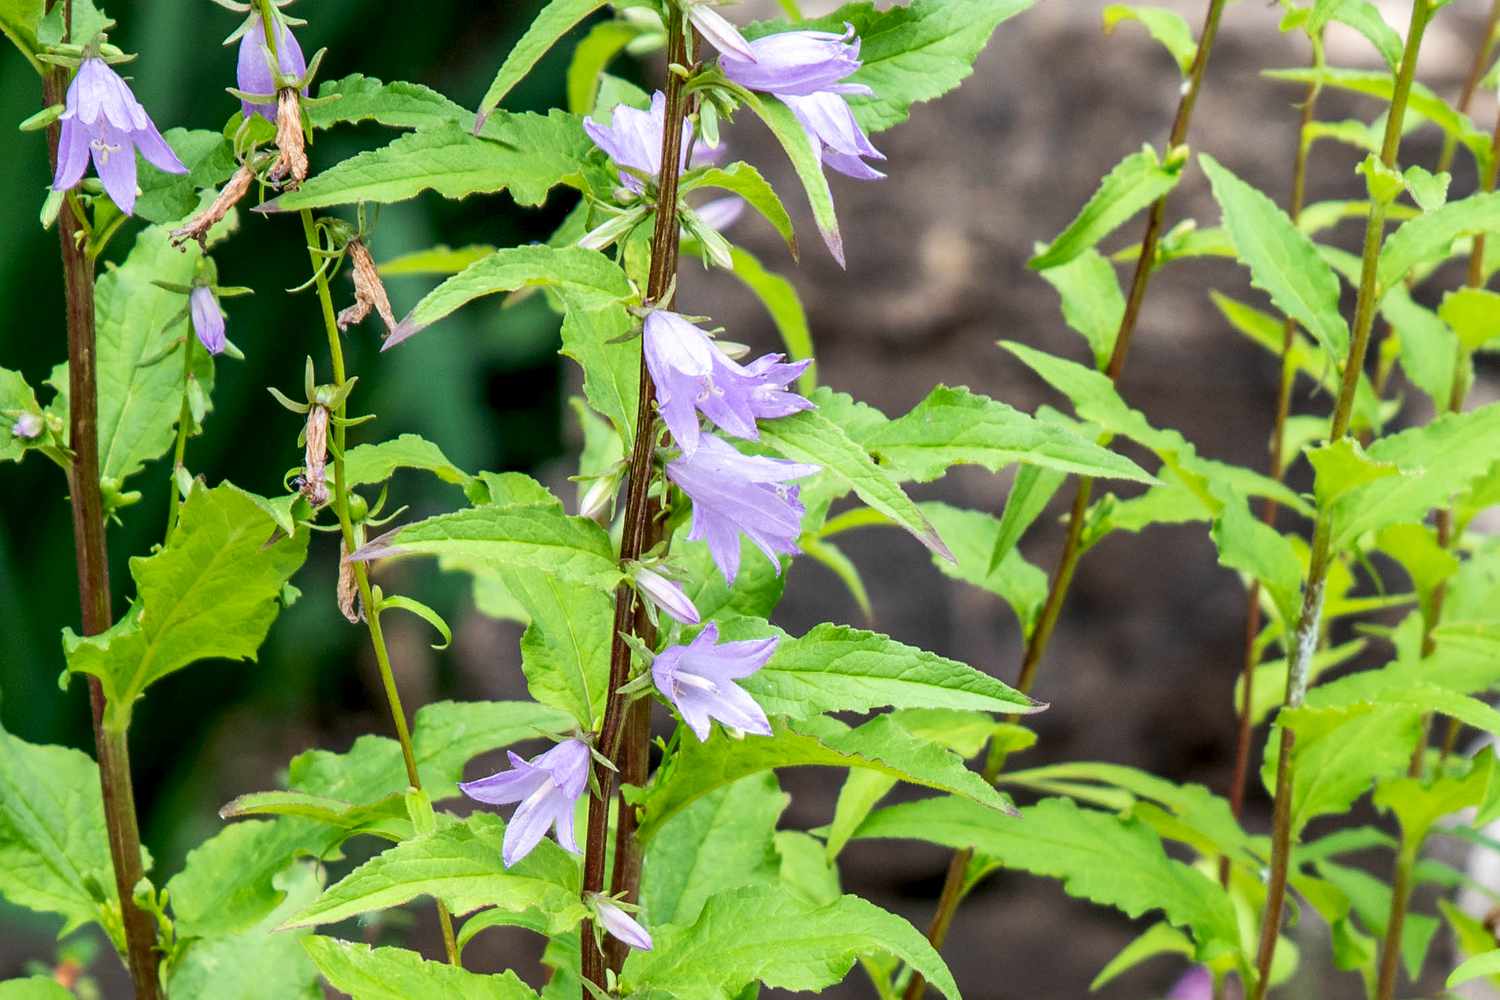 Bellflower plant with thin brown stems with light purple flowers and leaves closeup